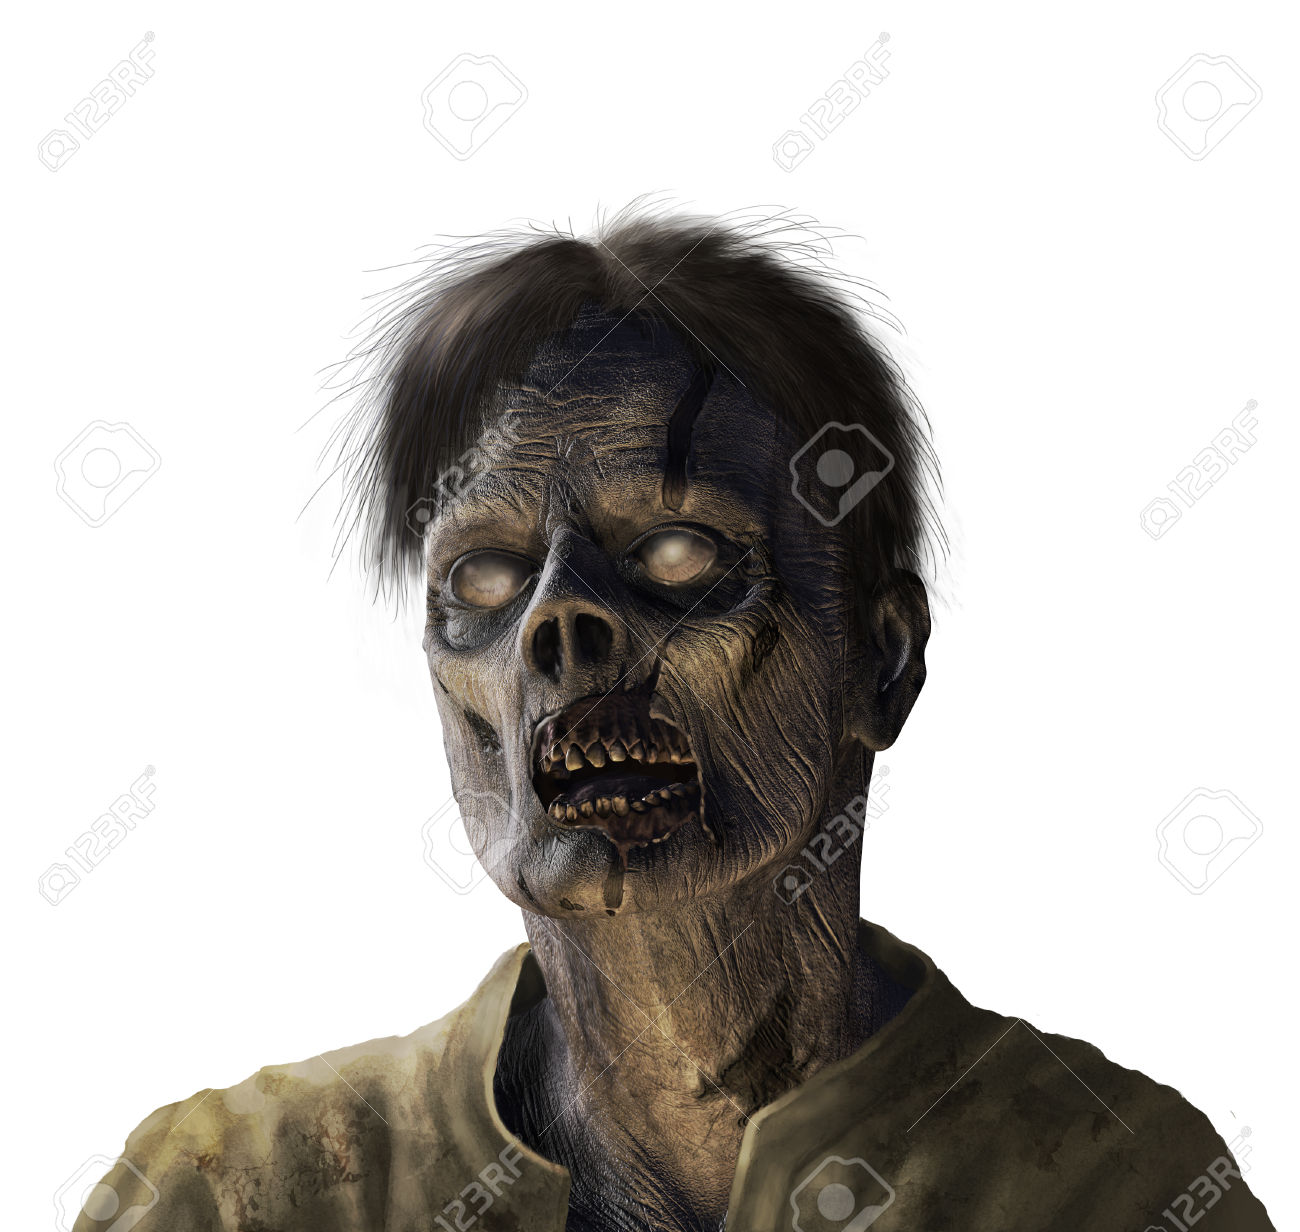 Nice Images Collection: Portrait Of A Zombie Desktop Wallpapers